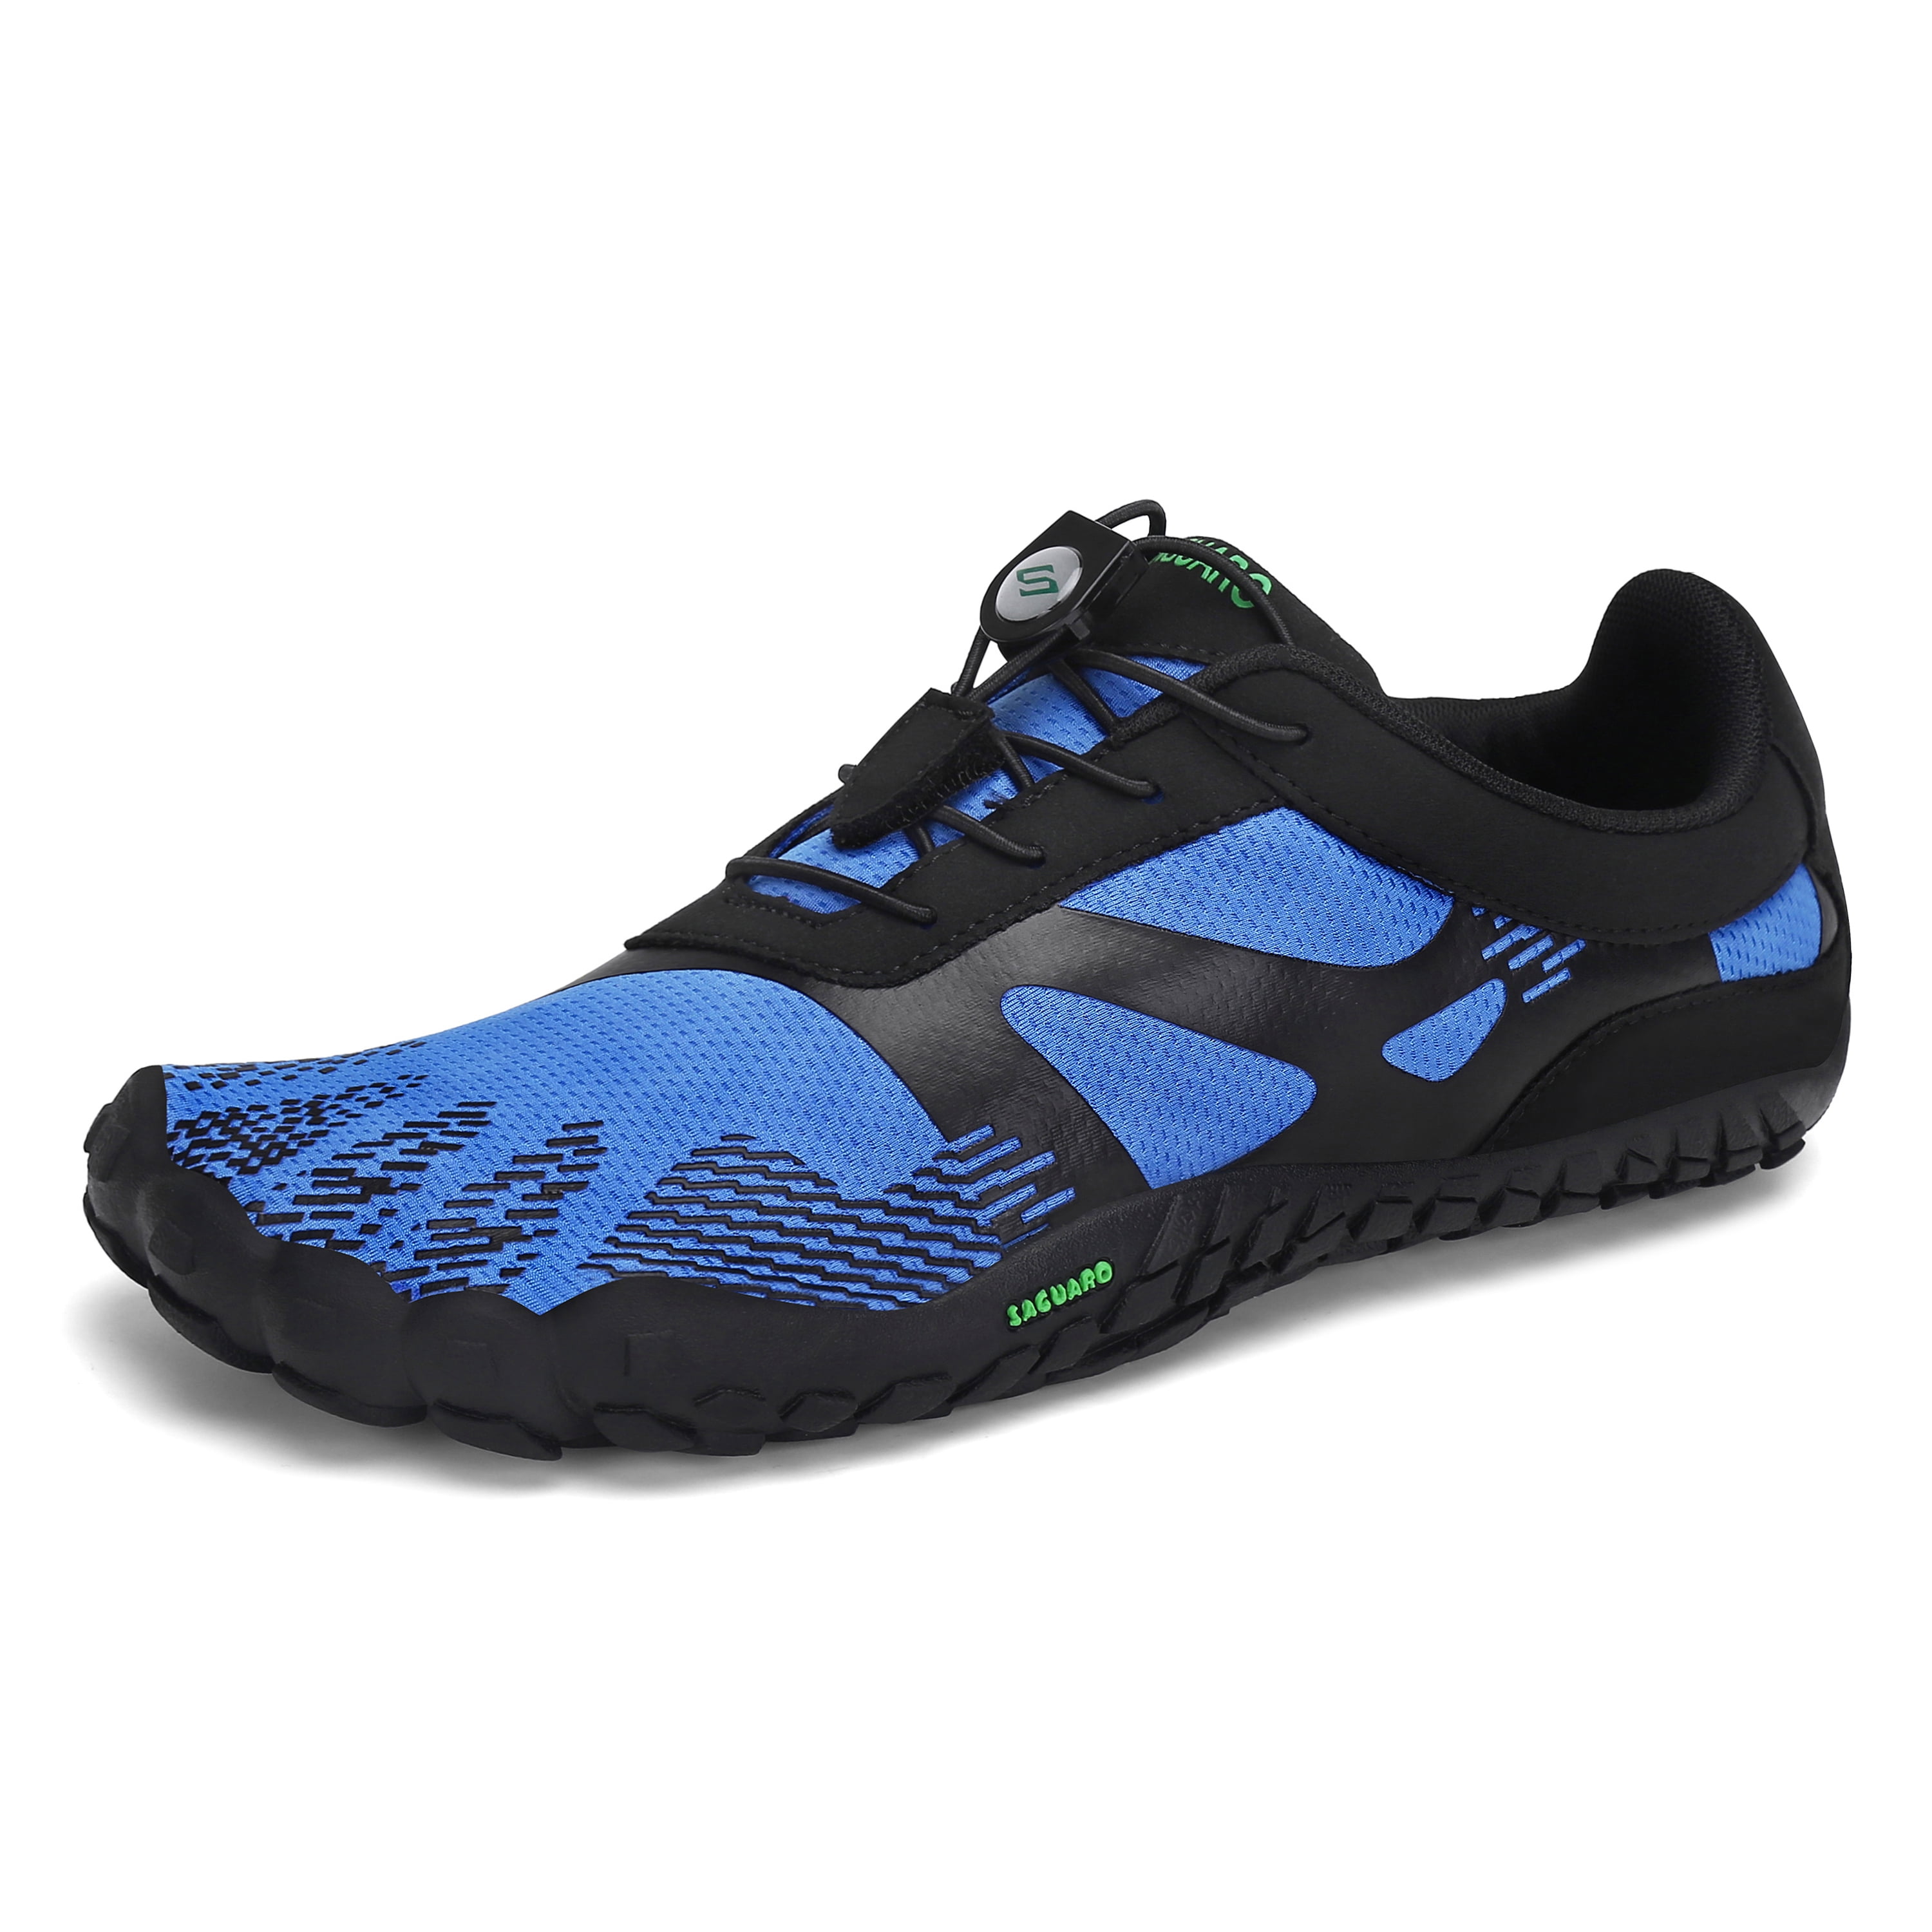 Mens Barefoot Water Shoes Outdoor Surf Beach Climbing Breathable Athletic Shoes 